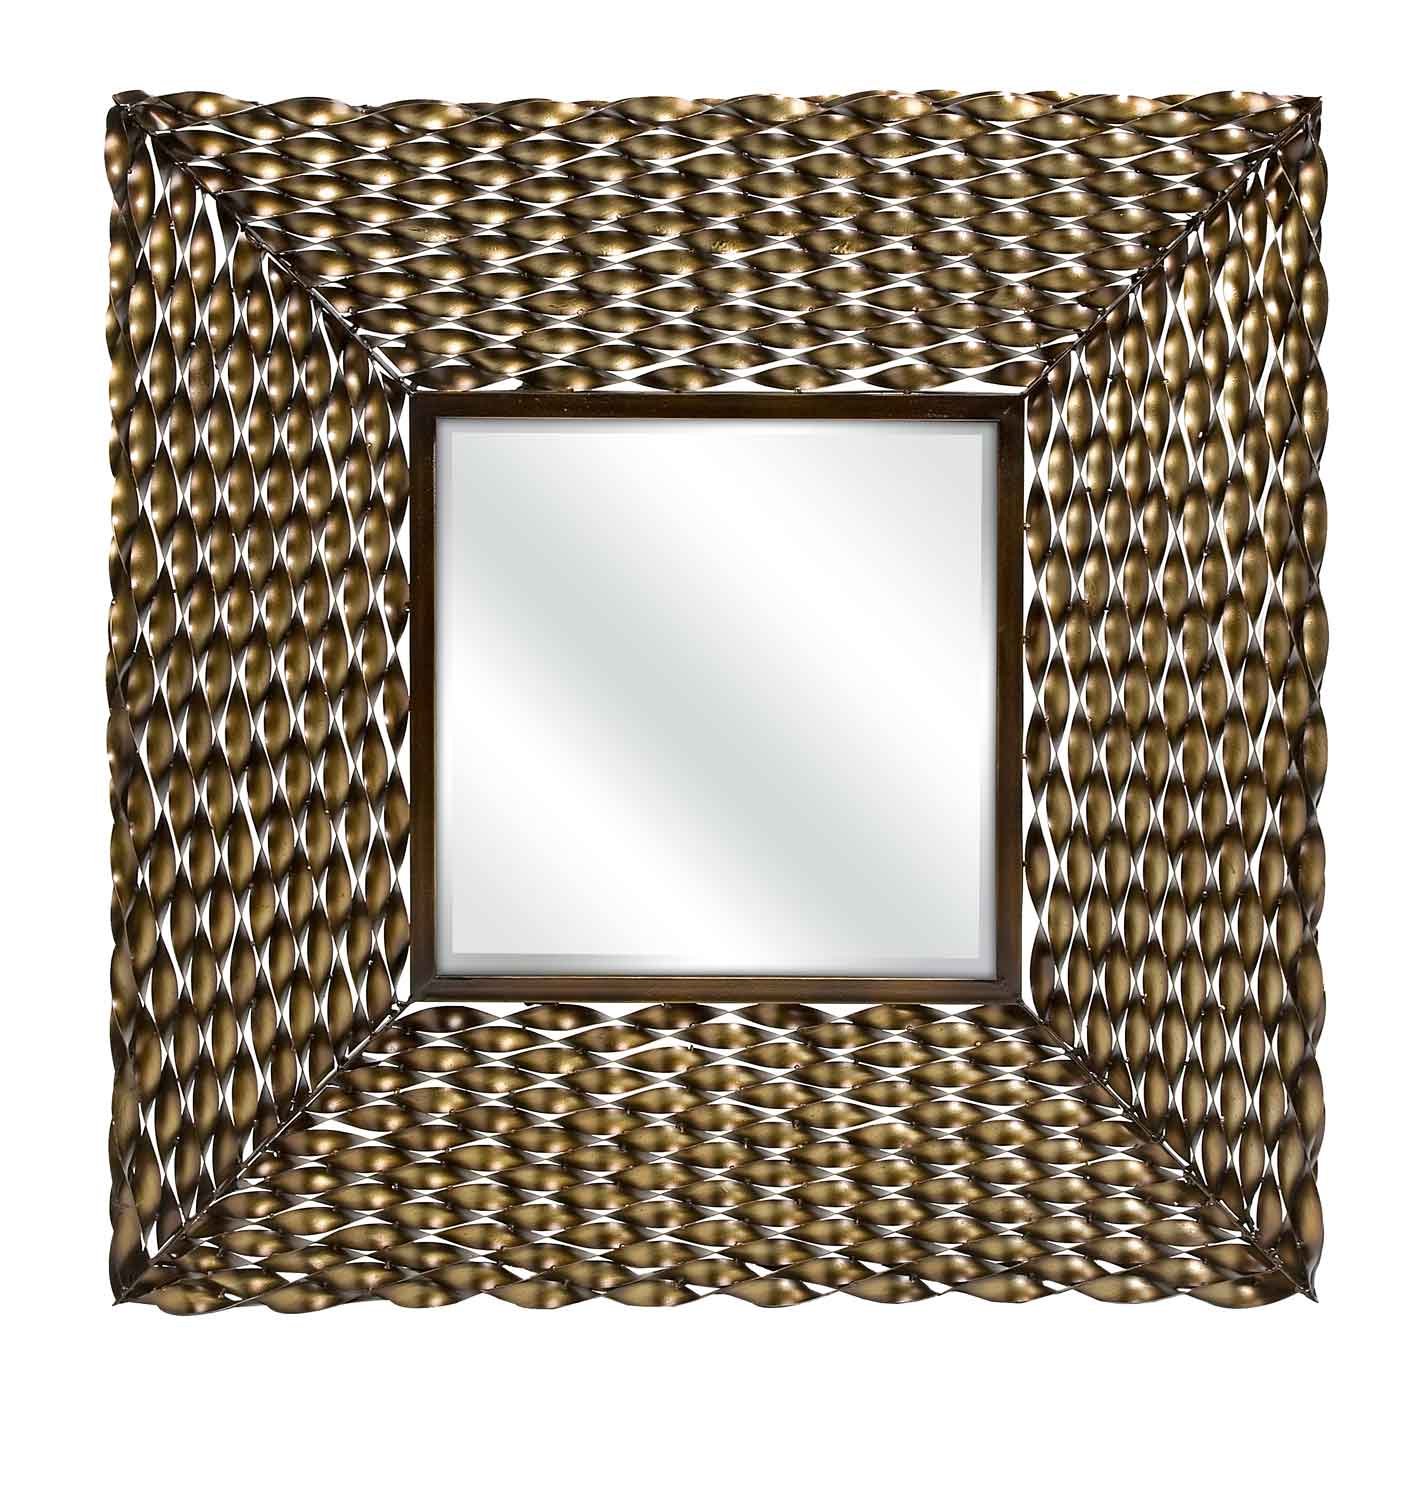 IMAX Worcester Twisted Metal Square Wall Mirror